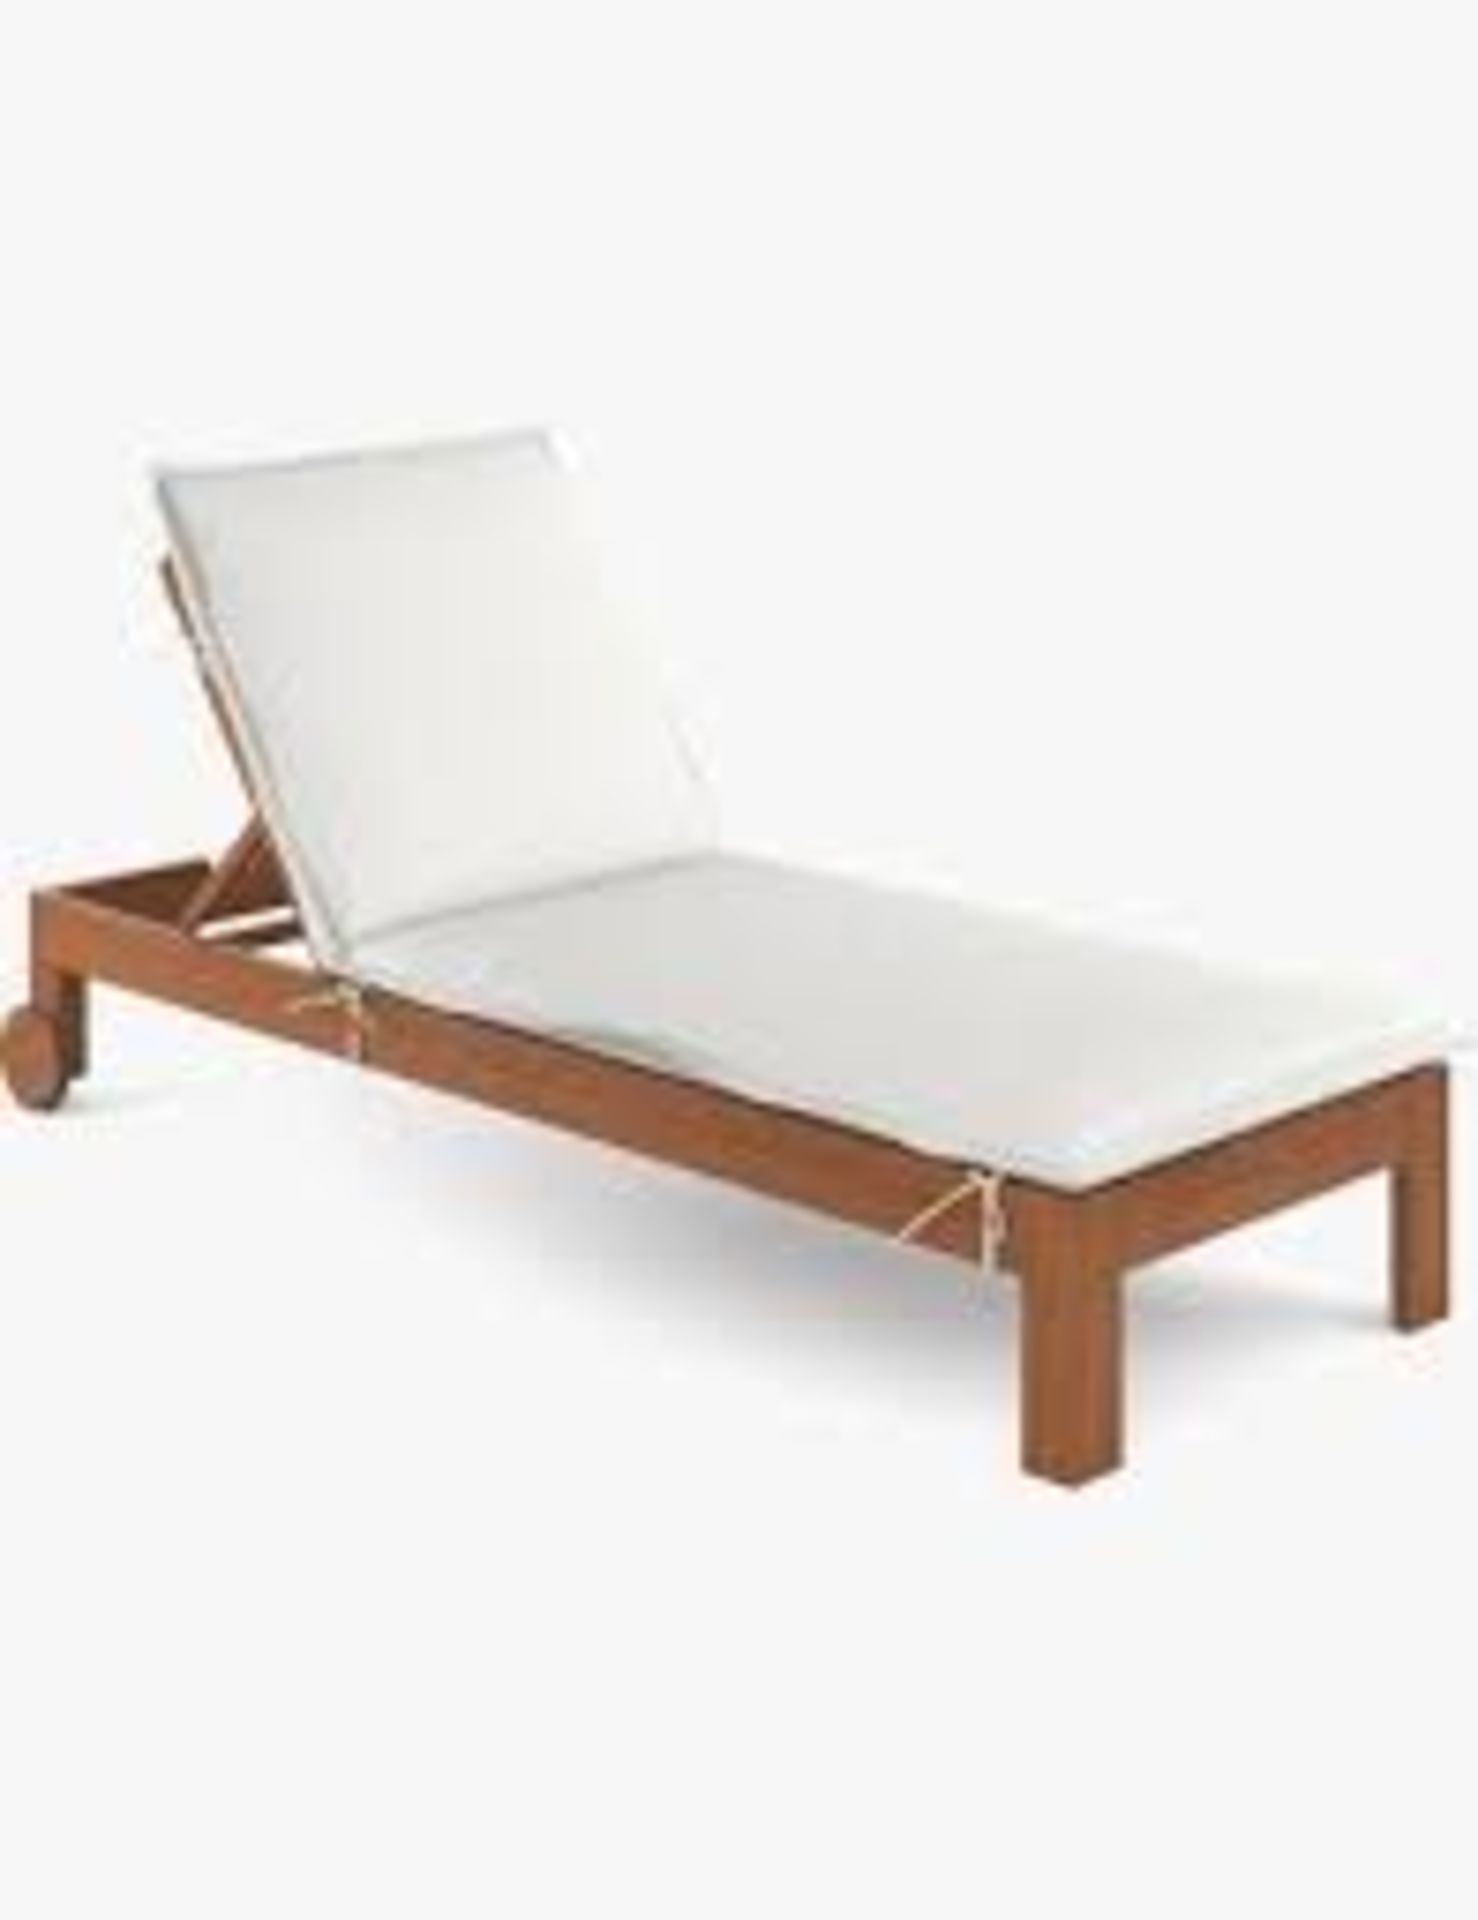 PALLET TO CONTAIN 5 X BRAND NEW JOHN LEWIS Cove Garden Sun Lounger, FSC-Certified (Eucalyptus Wood), - Image 2 of 2